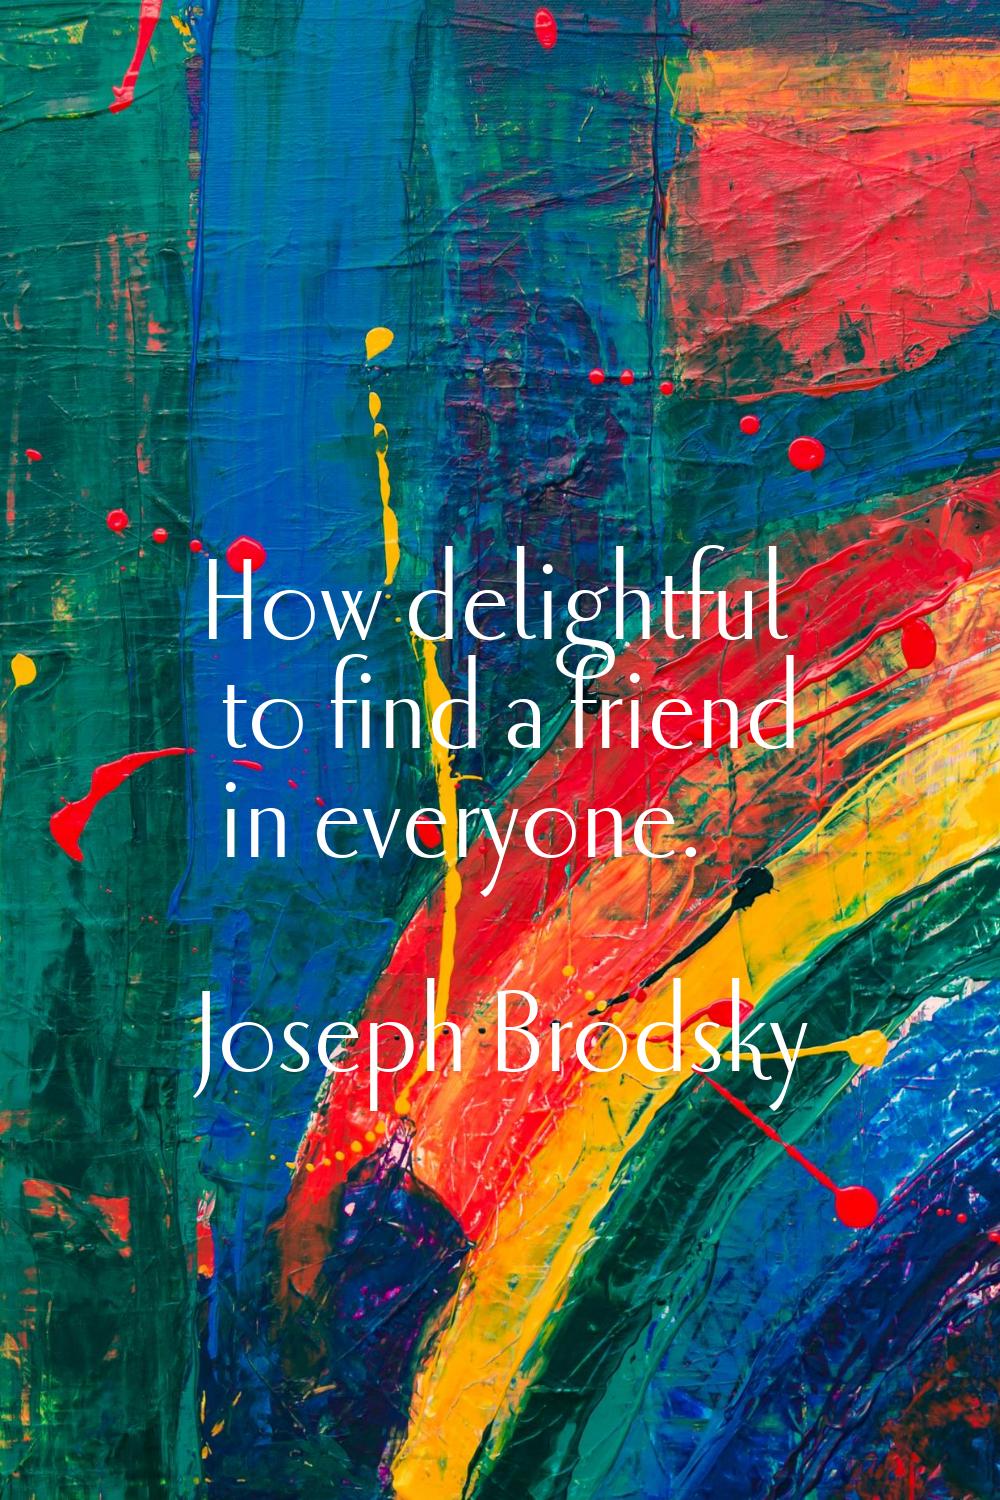 How delightful to find a friend in everyone.